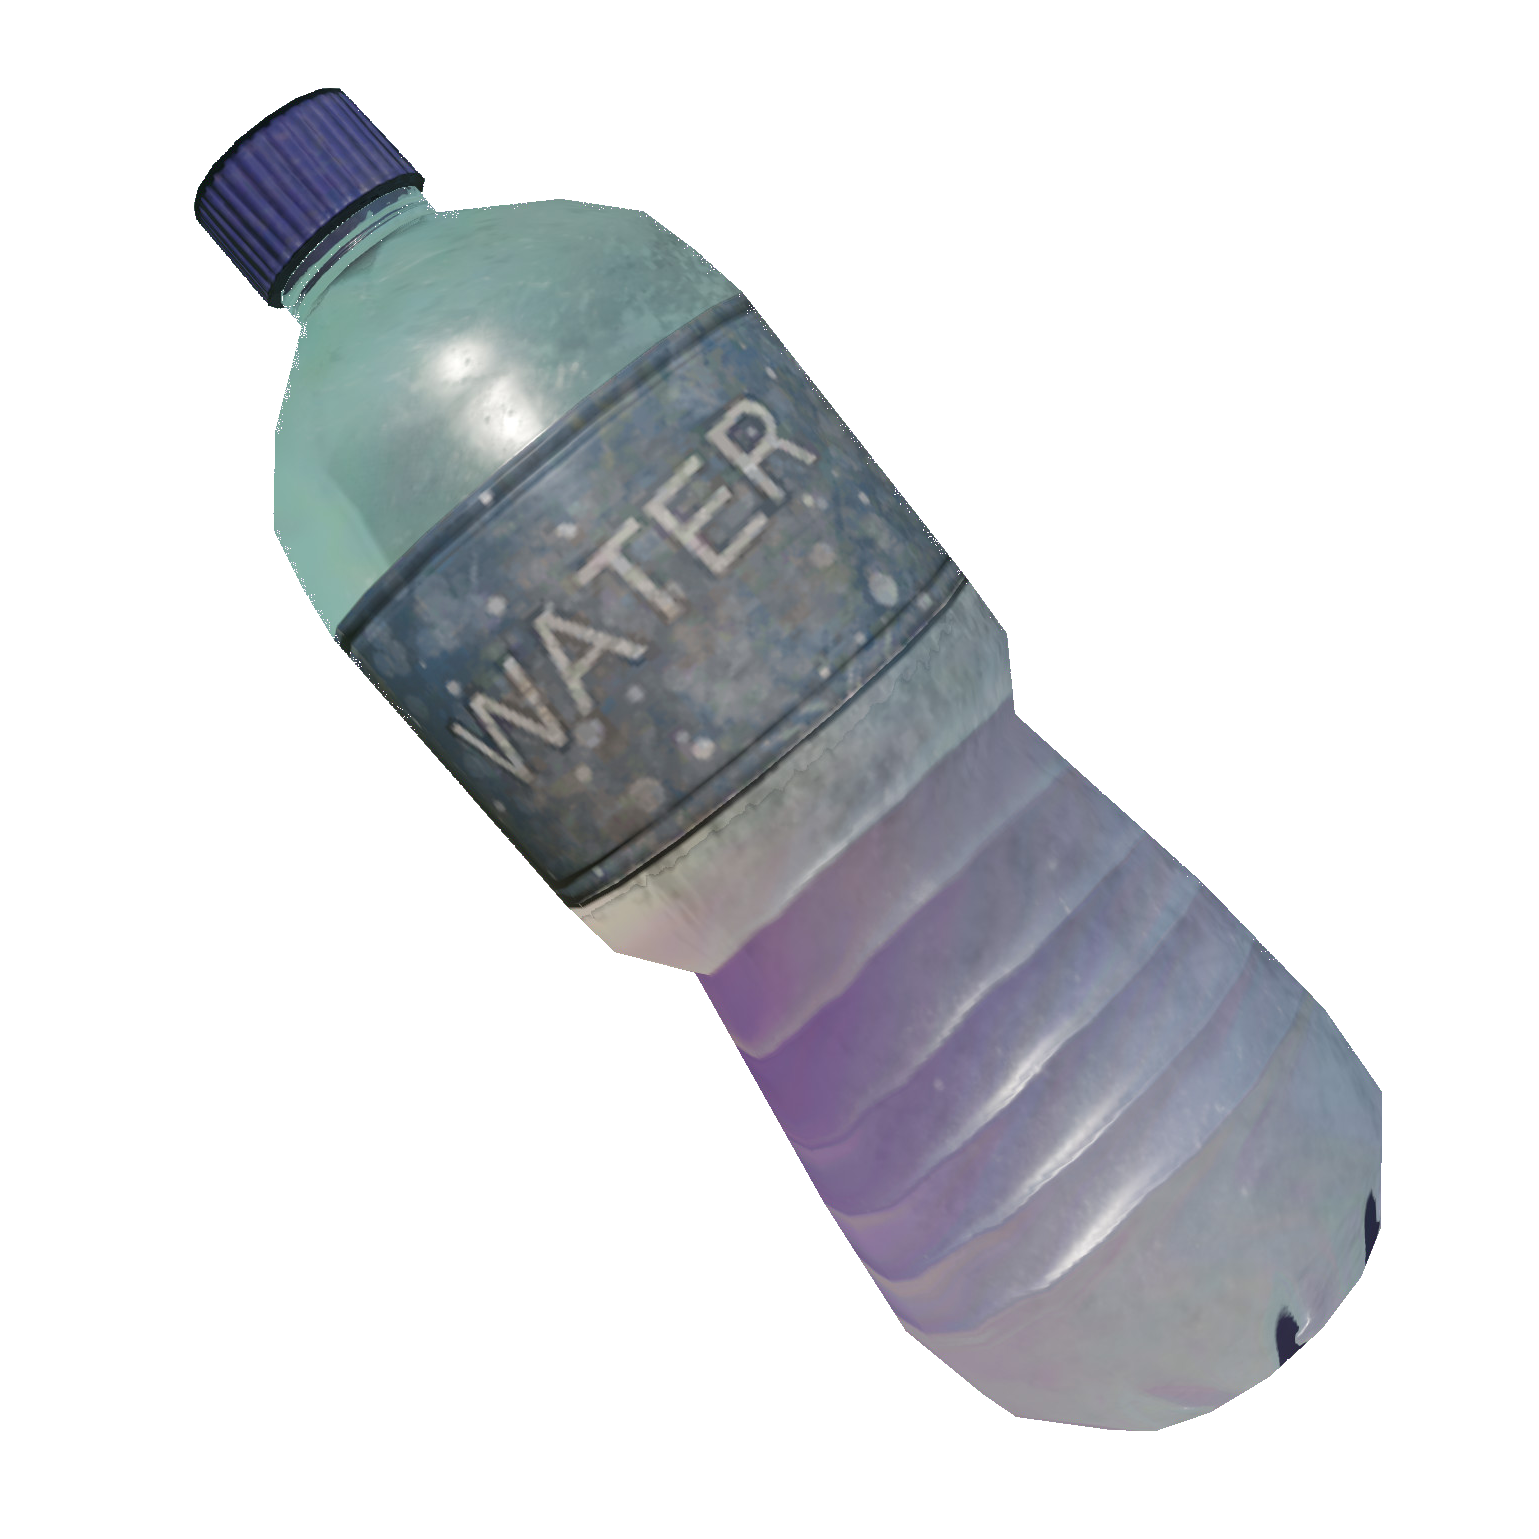 https://static.wikia.nocookie.net/miscreated/images/a/ad/WaterBottle_2048.png/revision/latest?cb=20190901163344